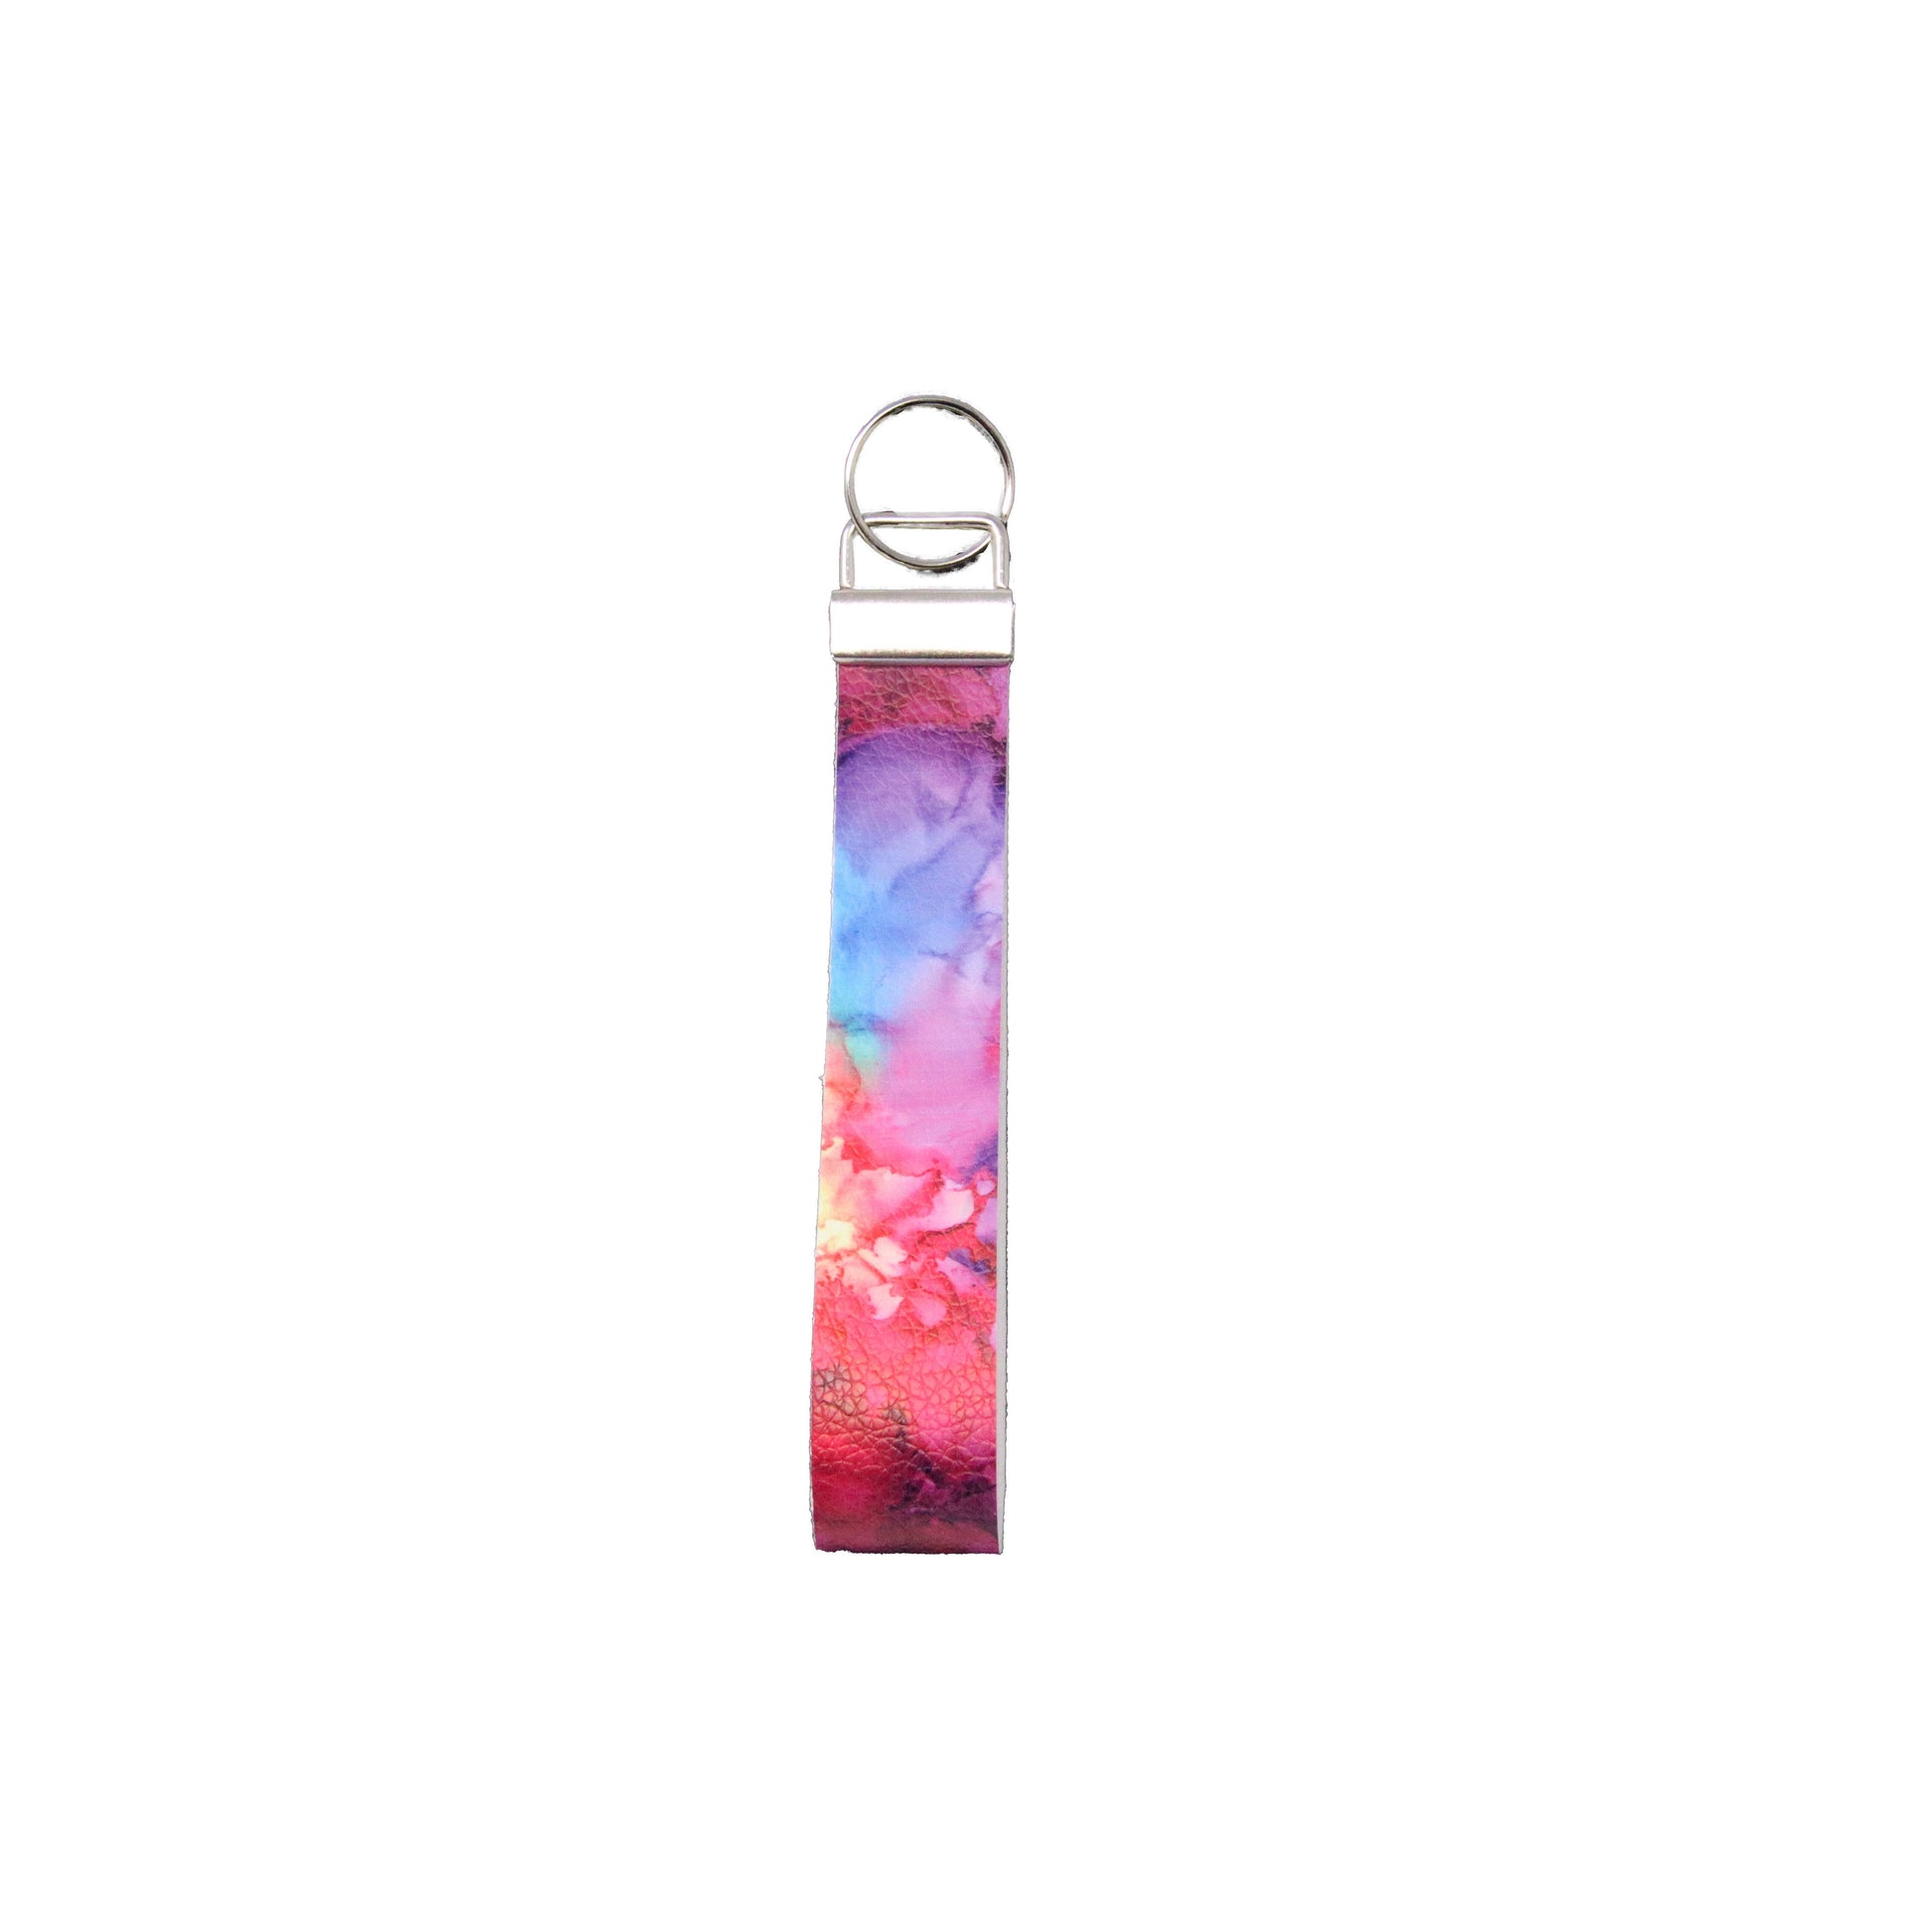 6 inch Multicolored Ink Key Chain